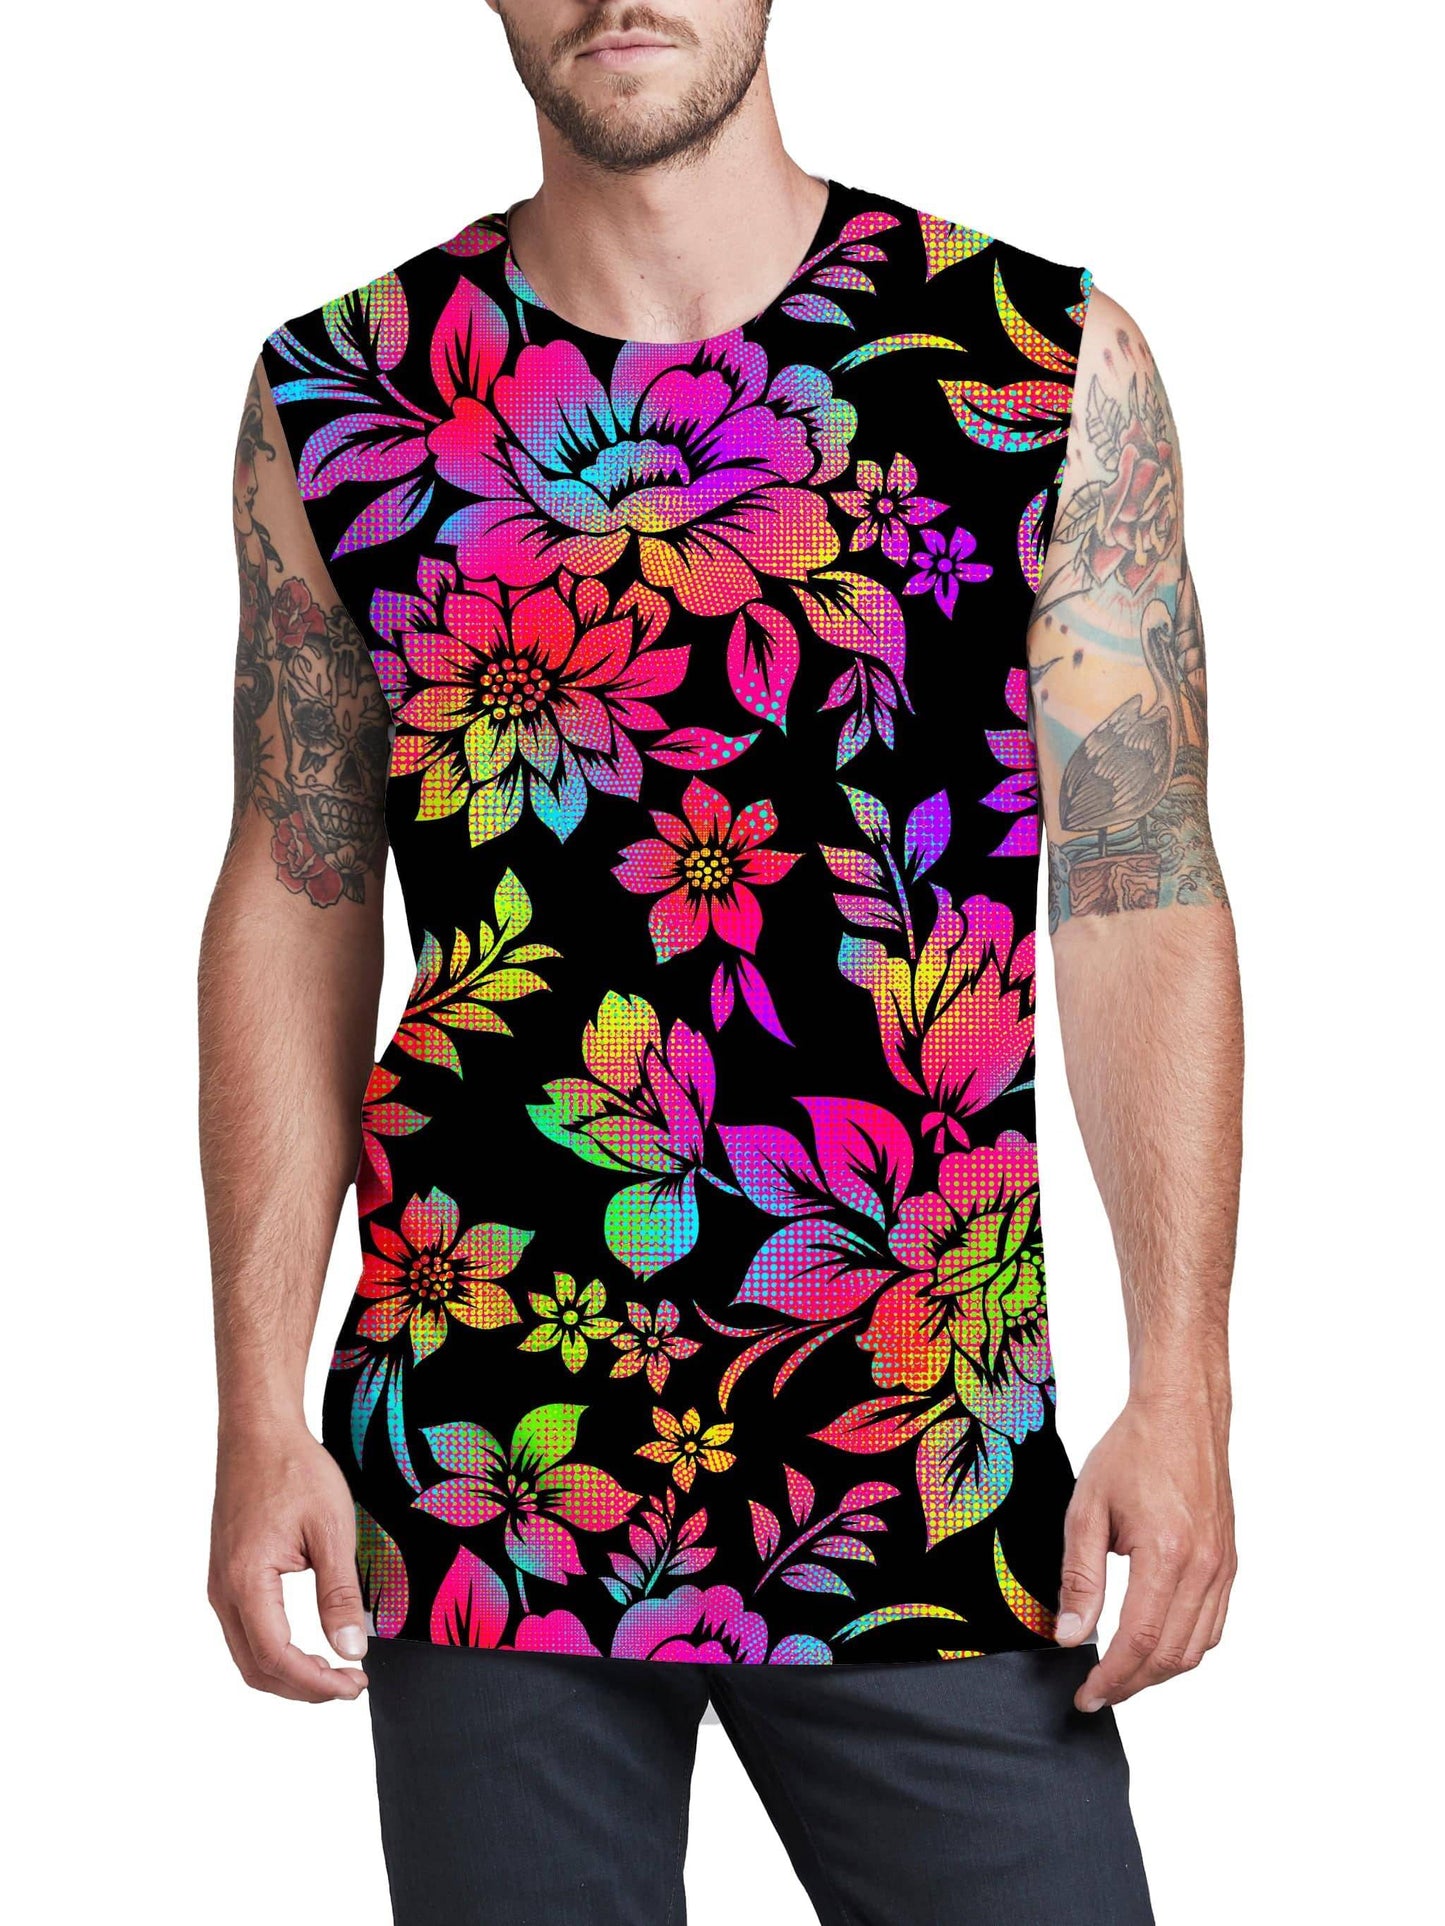 Nature's Candy Men's Muscle Tank, Noctum X Truth, | iEDM